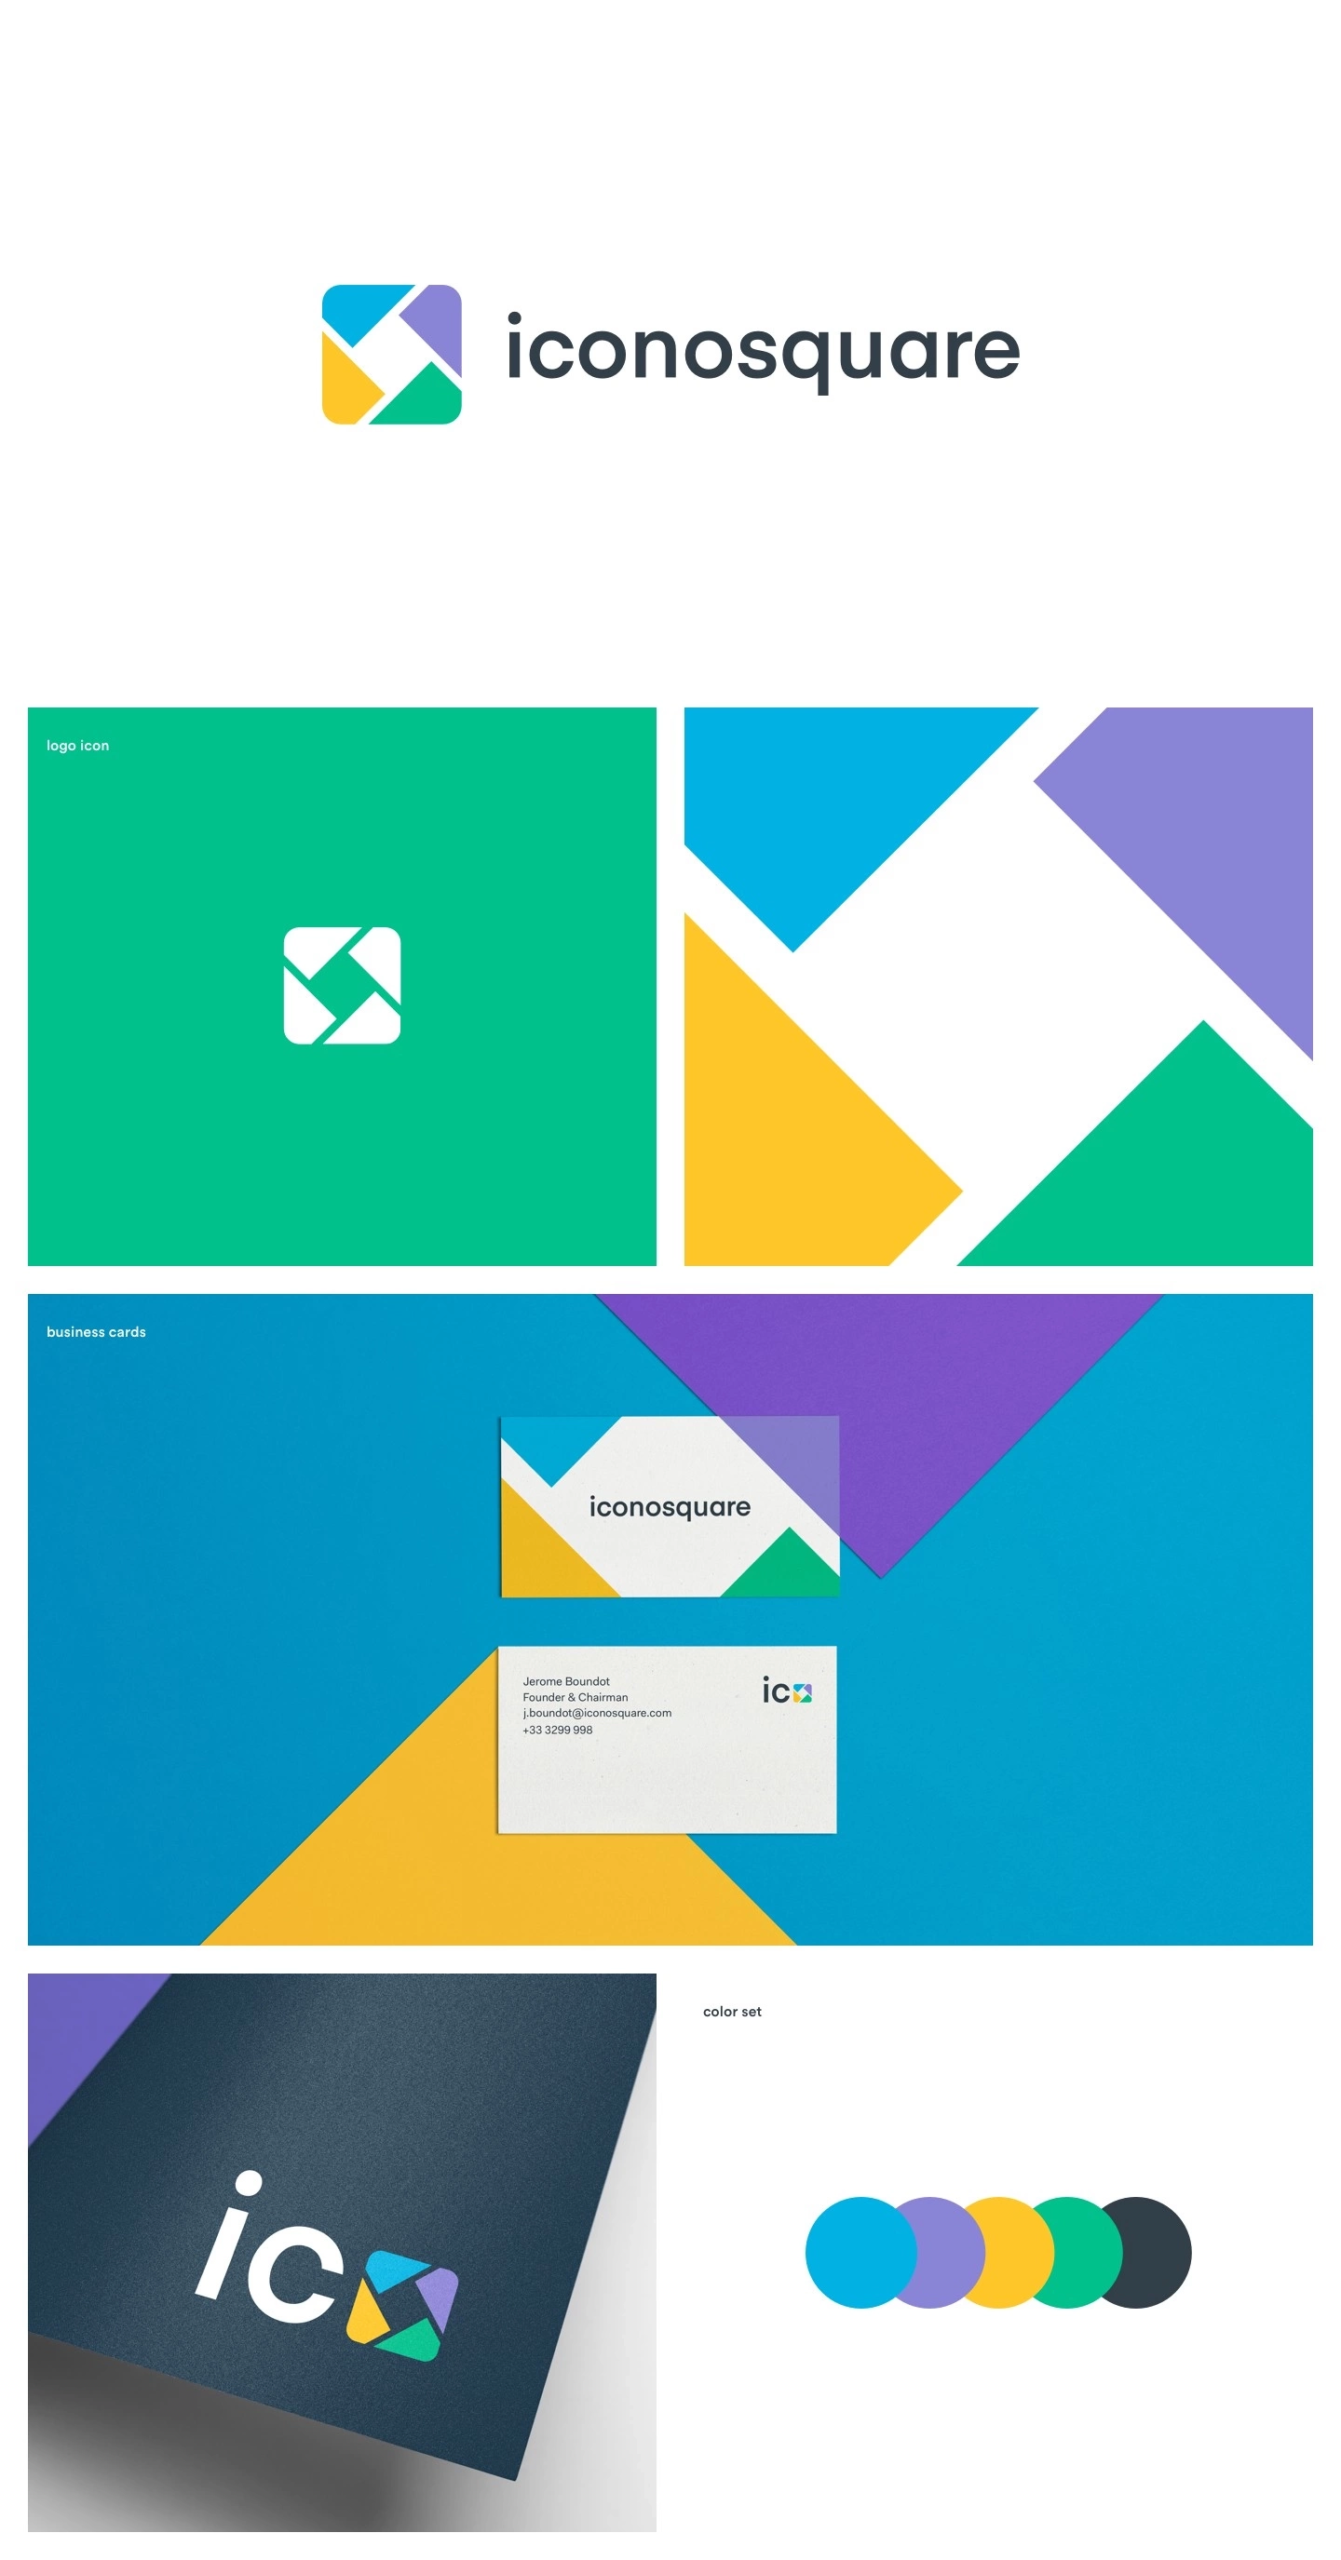 Iconosquare visual identity details and colors